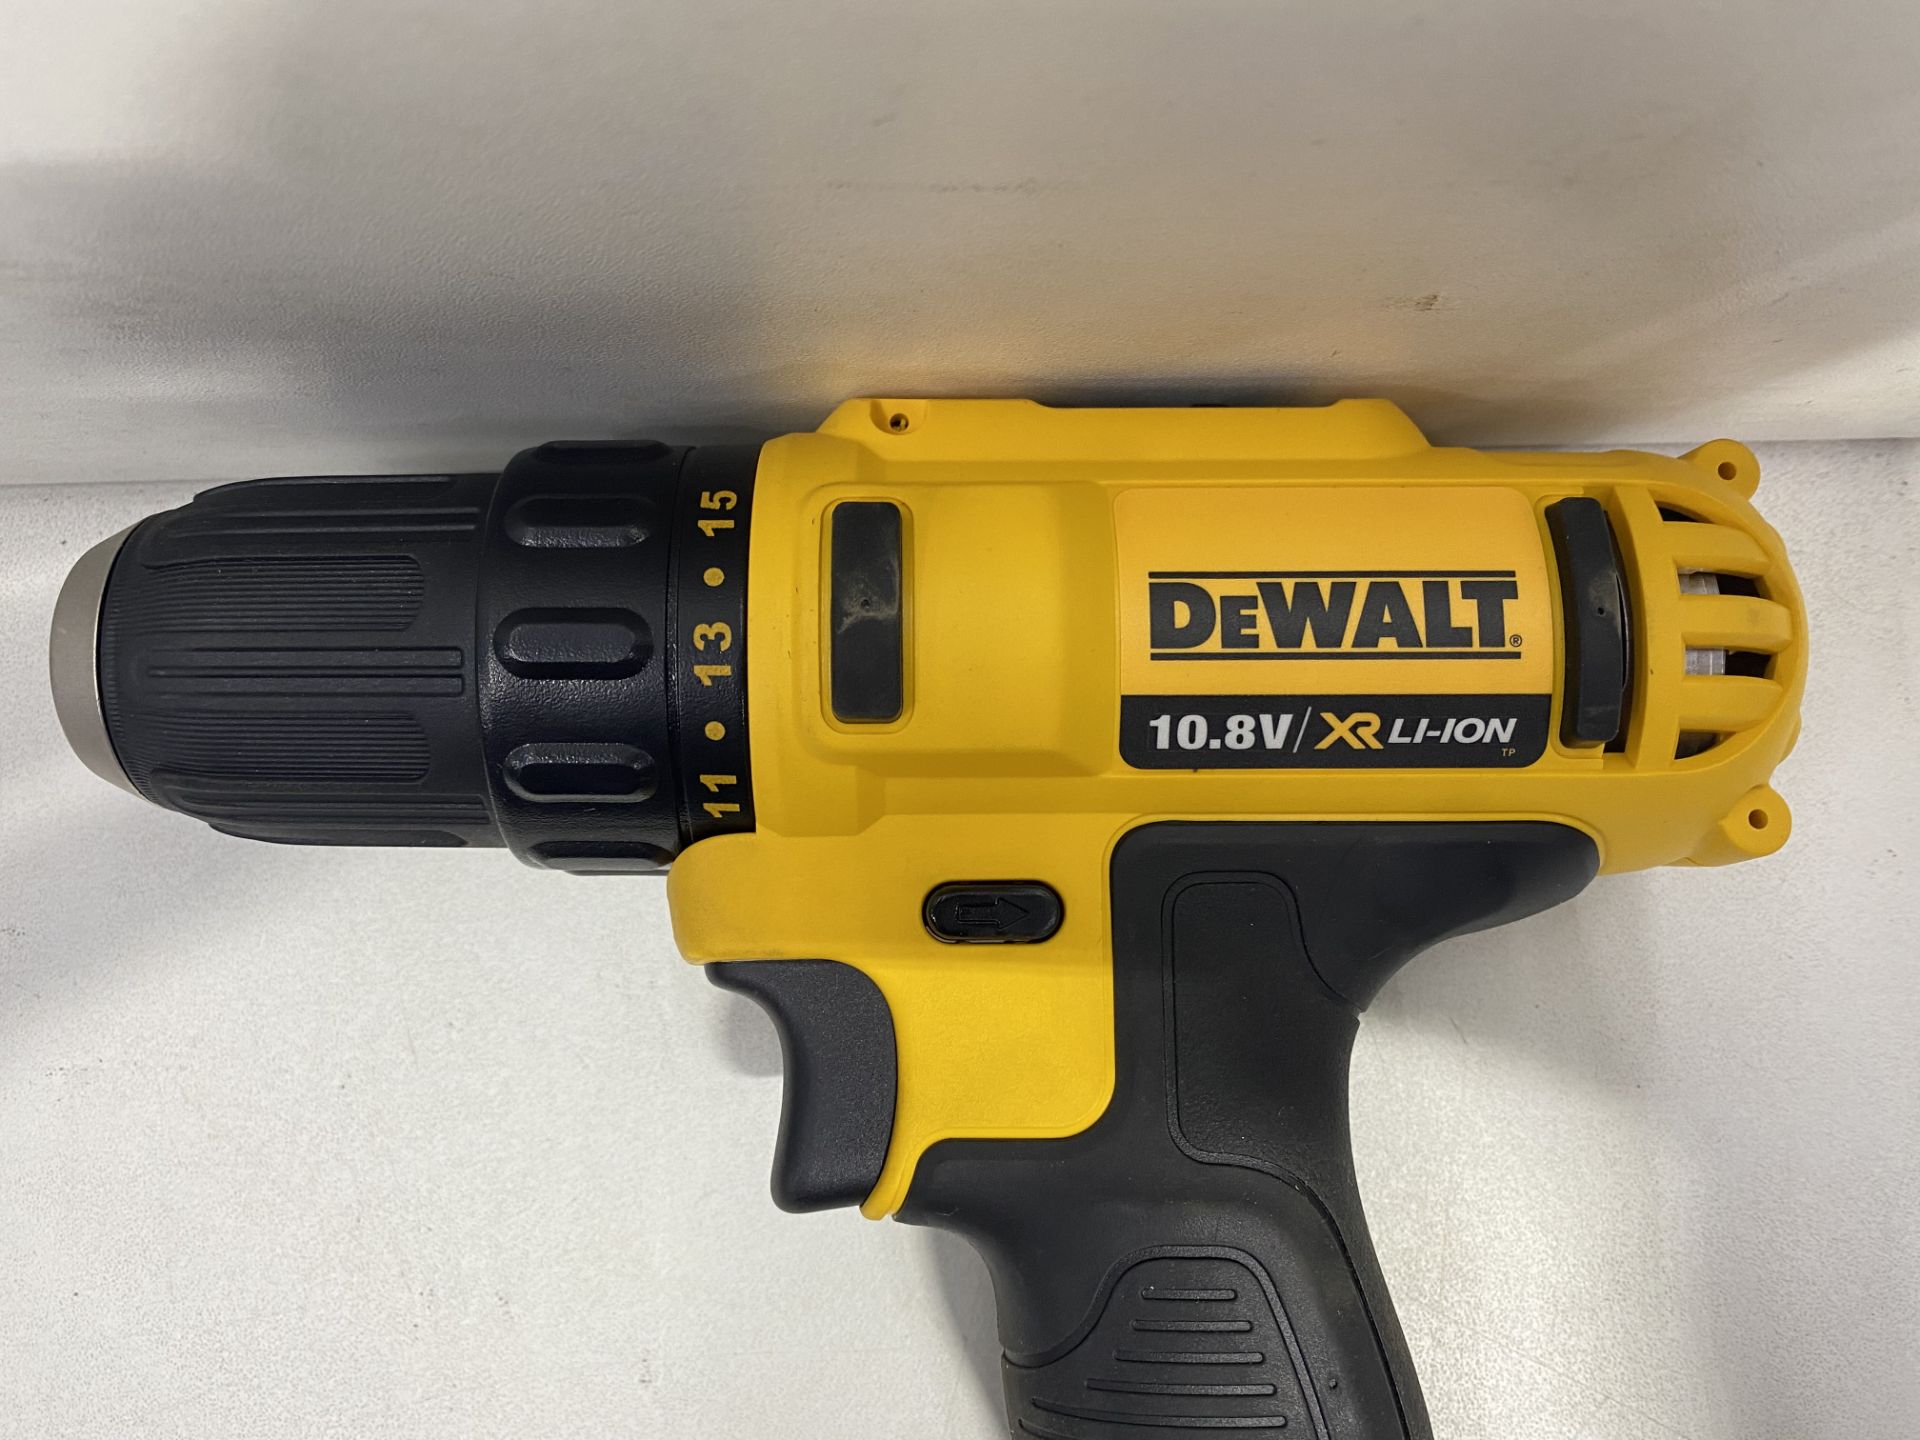 2 x DeWalt DCD710 10.8V XR Cordless Compact Drill Driver (Body Only) - Image 3 of 5